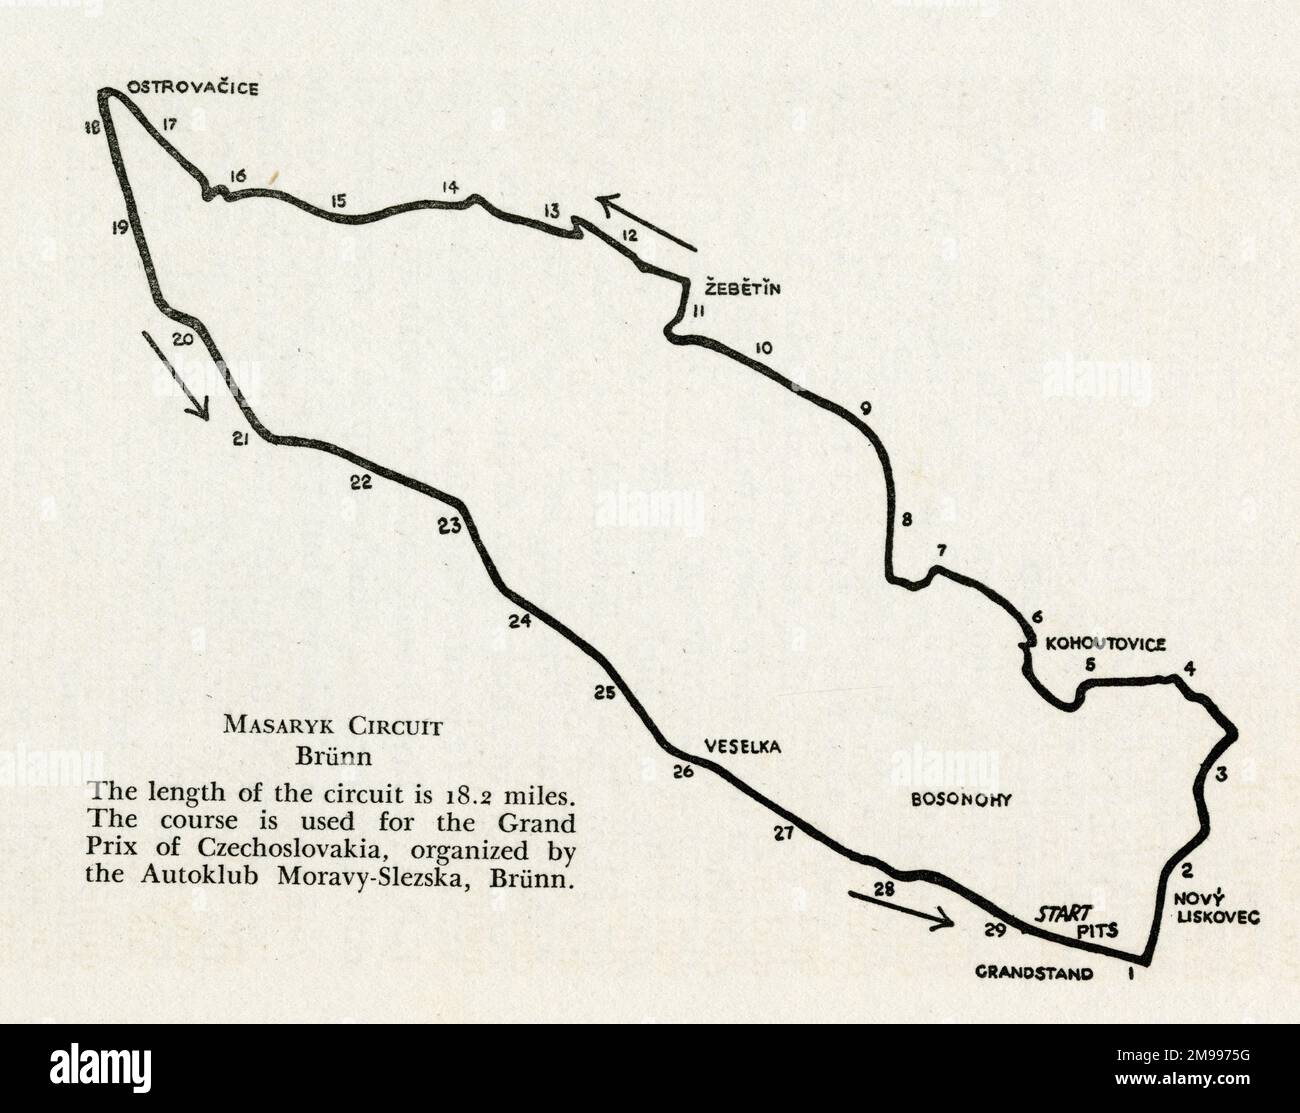 Motor racing circuit track at Masaryk, Brunn, for the Czechoslovakia Grand Prix. Stock Photo